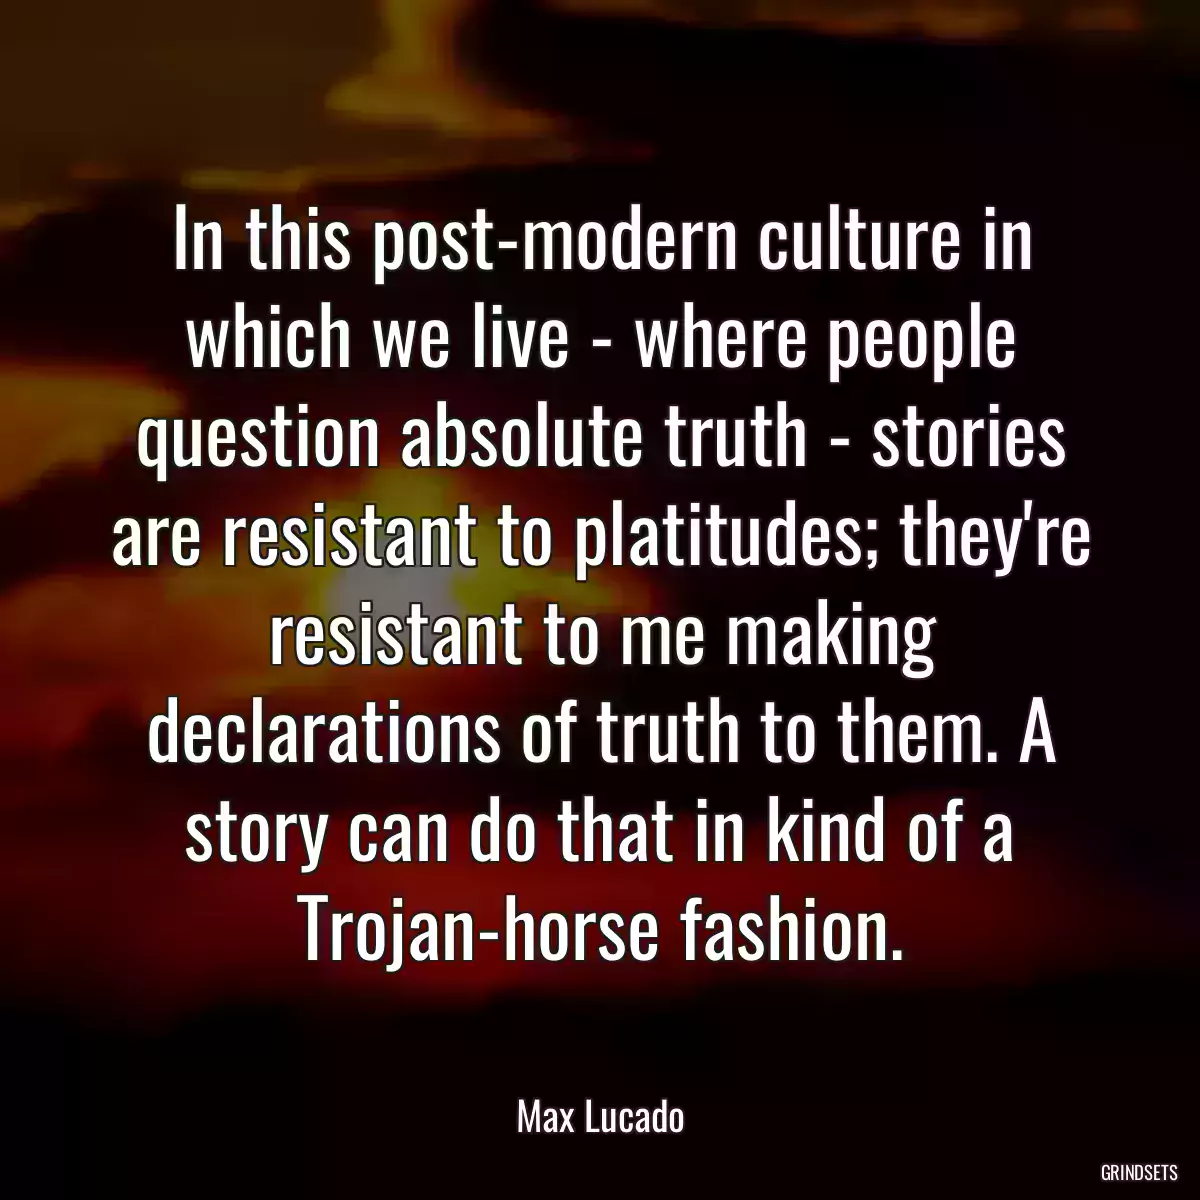 In this post-modern culture in which we live - where people question absolute truth - stories are resistant to platitudes; they\'re resistant to me making declarations of truth to them. A story can do that in kind of a Trojan-horse fashion.